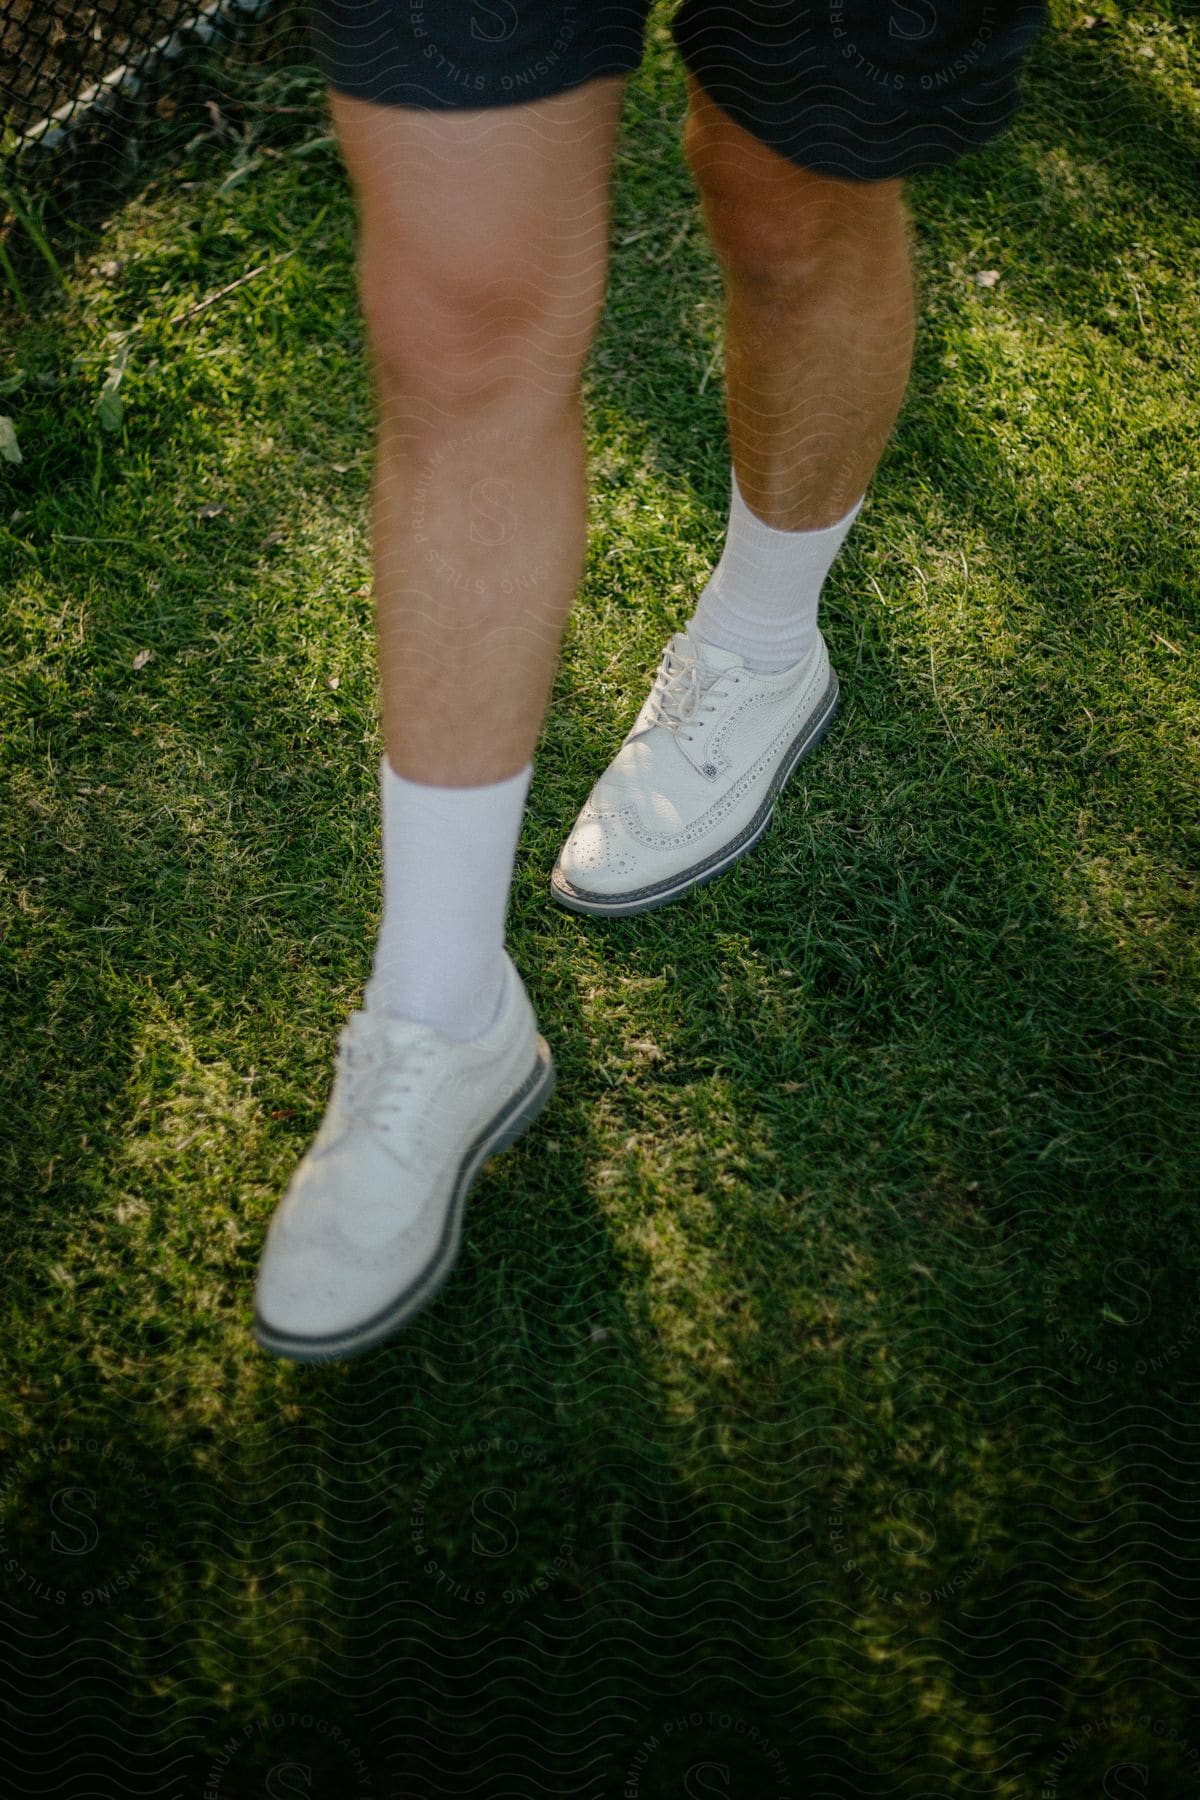 A man is wearing black shorts with tall white socks and white shoes